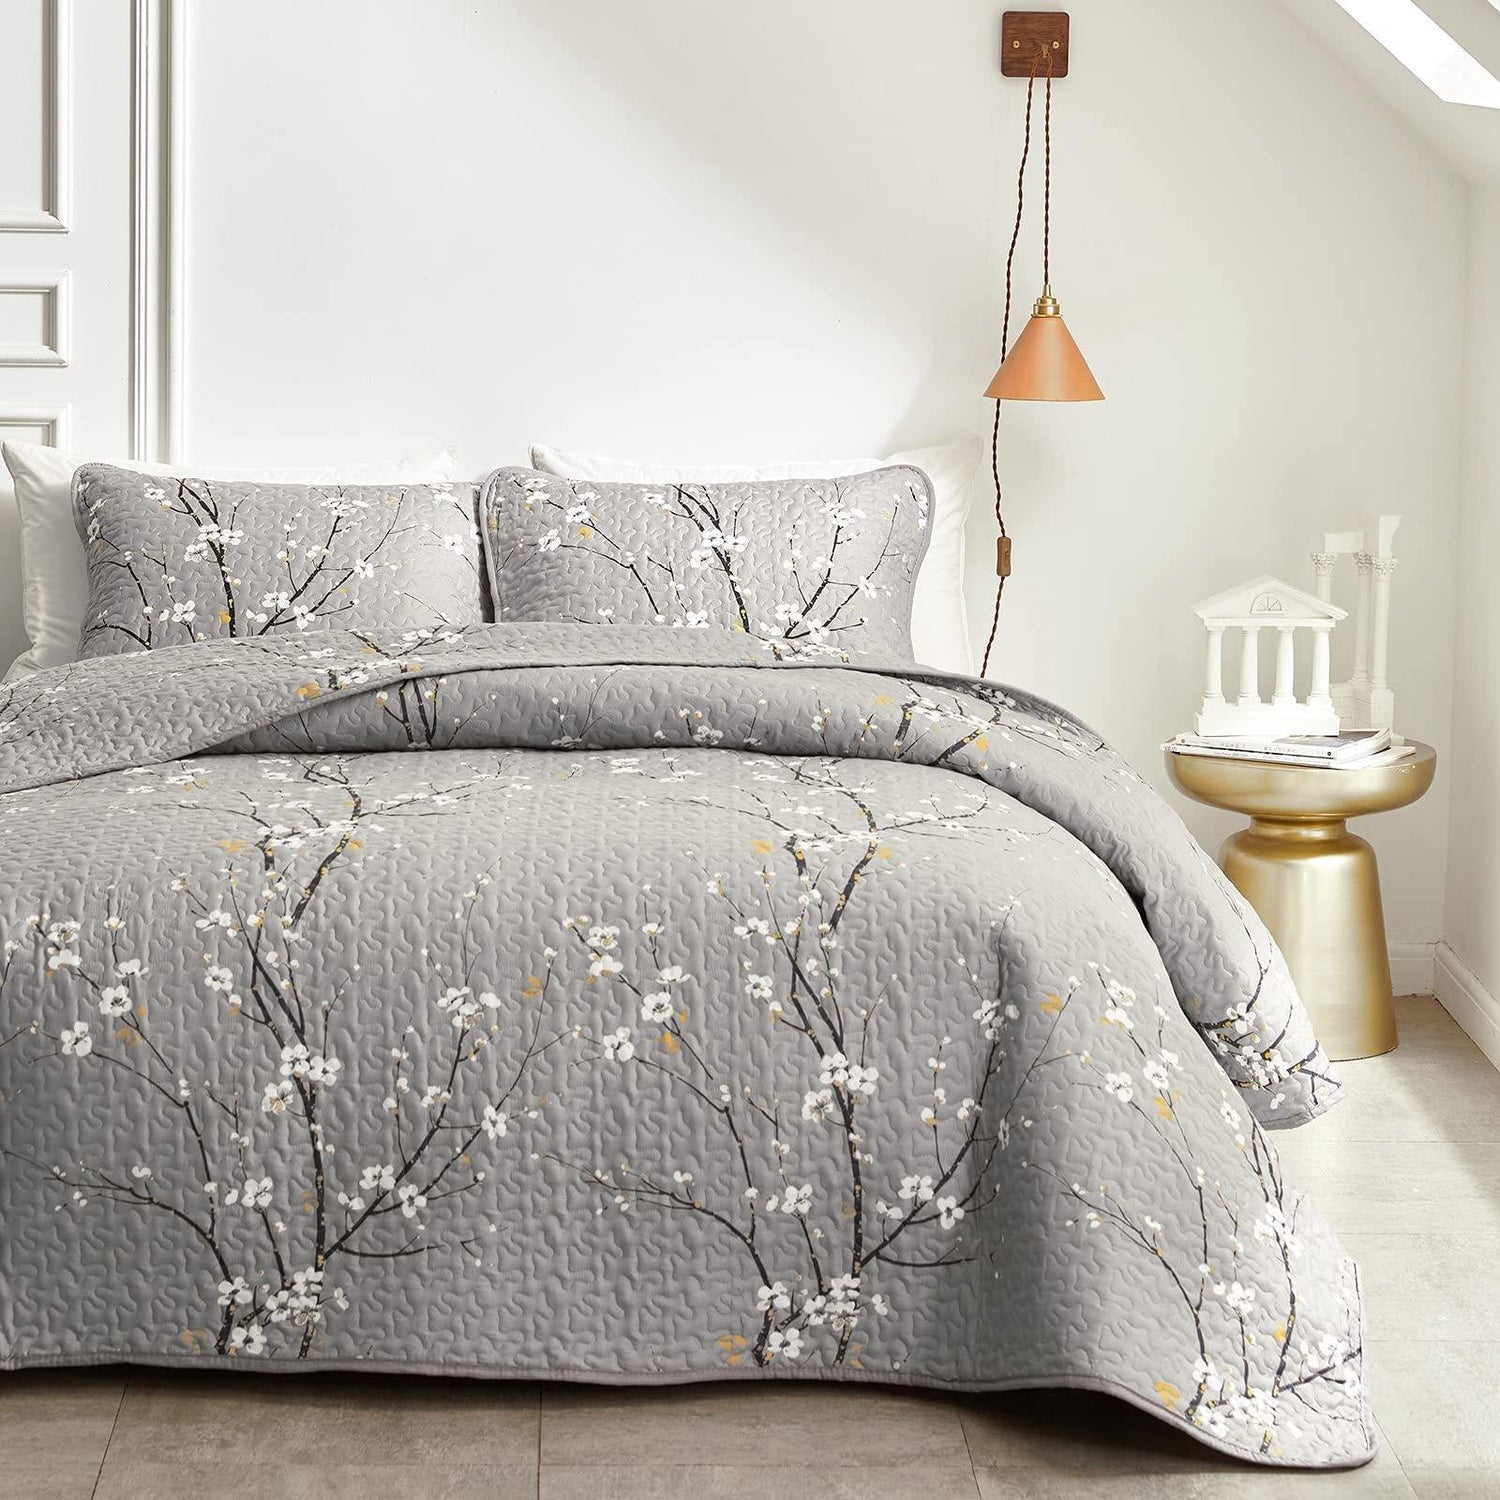 White flowers 3 Pieces Quilt Set Coverlet with 2 Pillowcases for all seasons - Wongs bedding